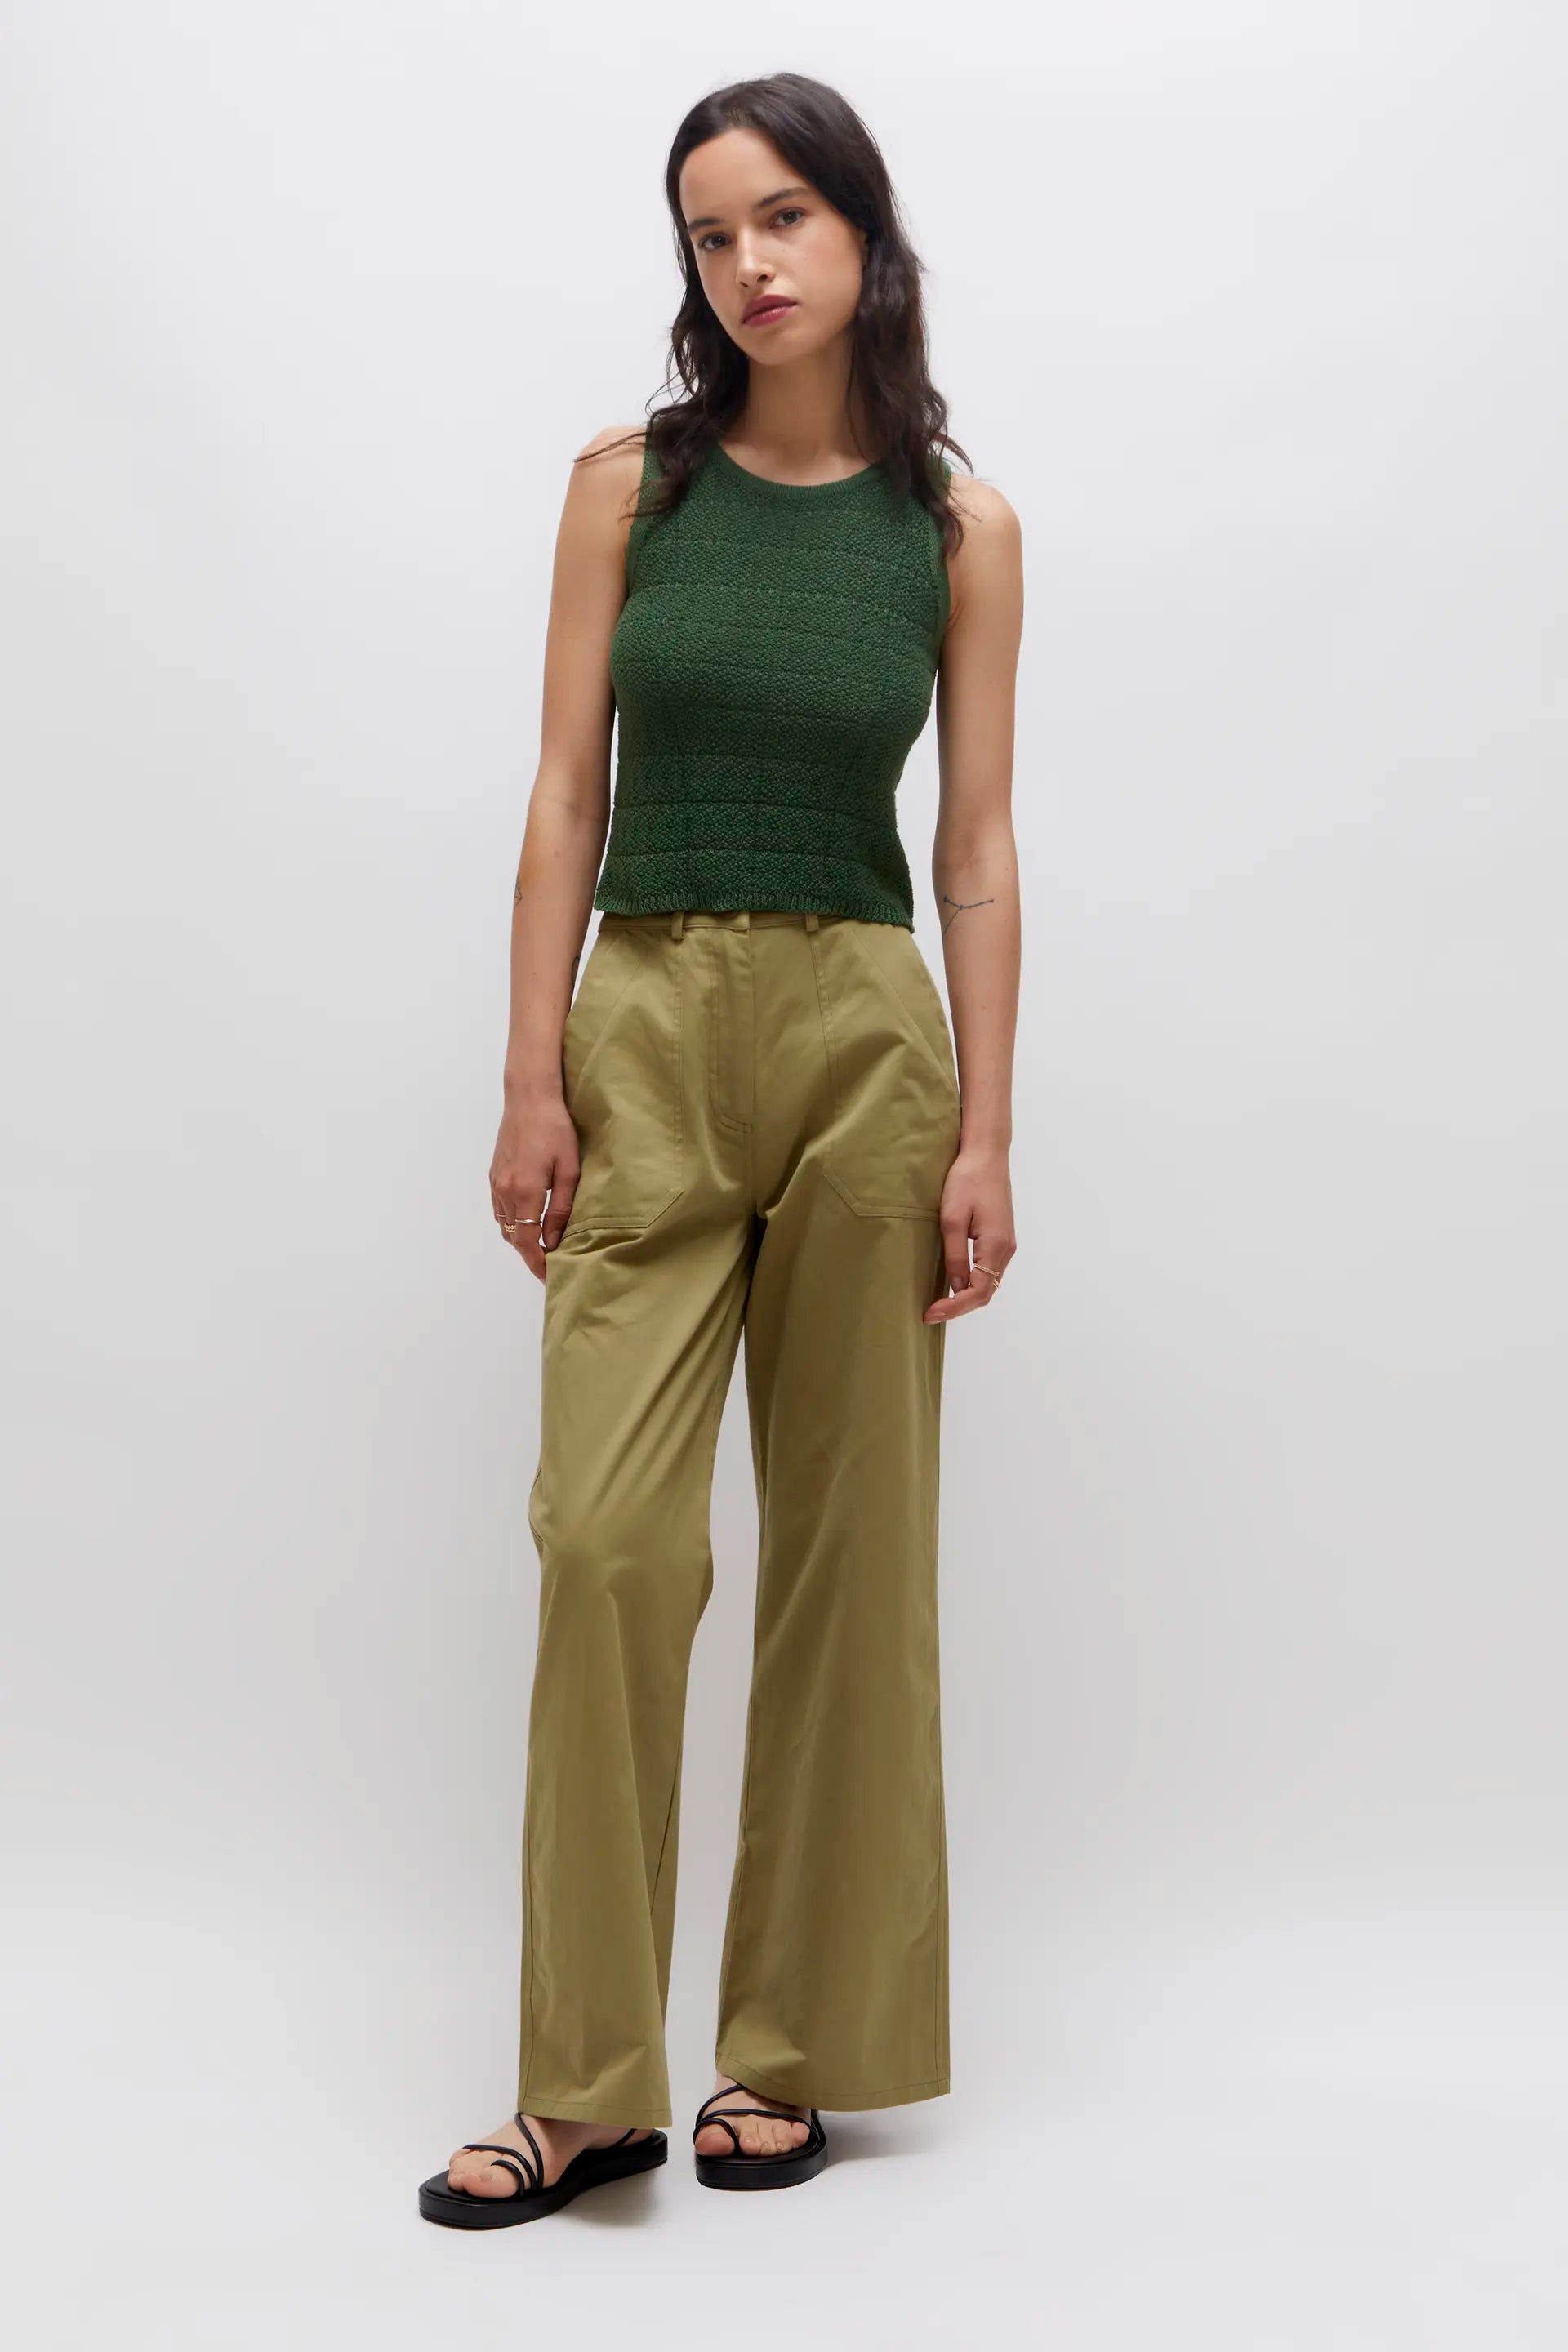 Wild Pony Green sleeveless knit top - clever alice